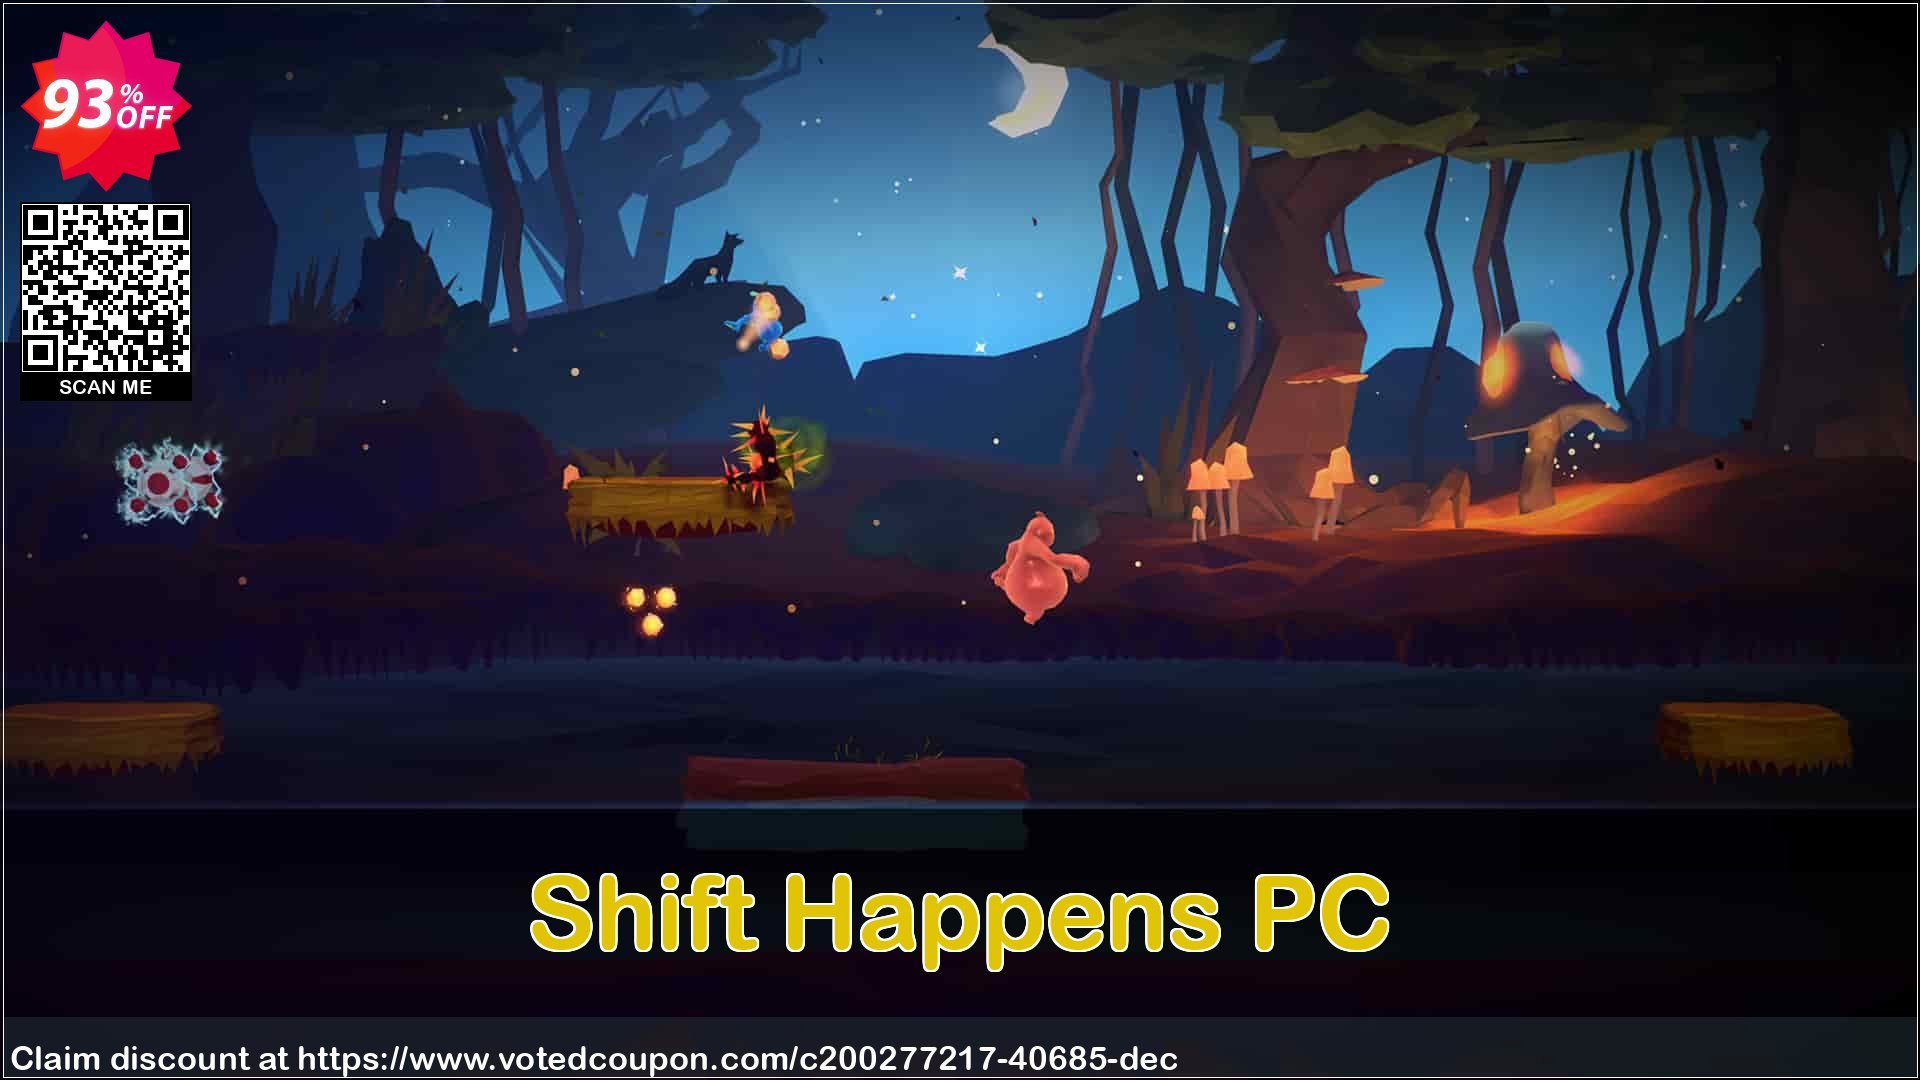 Shift Happens PC Coupon Code May 2024, 93% OFF - VotedCoupon